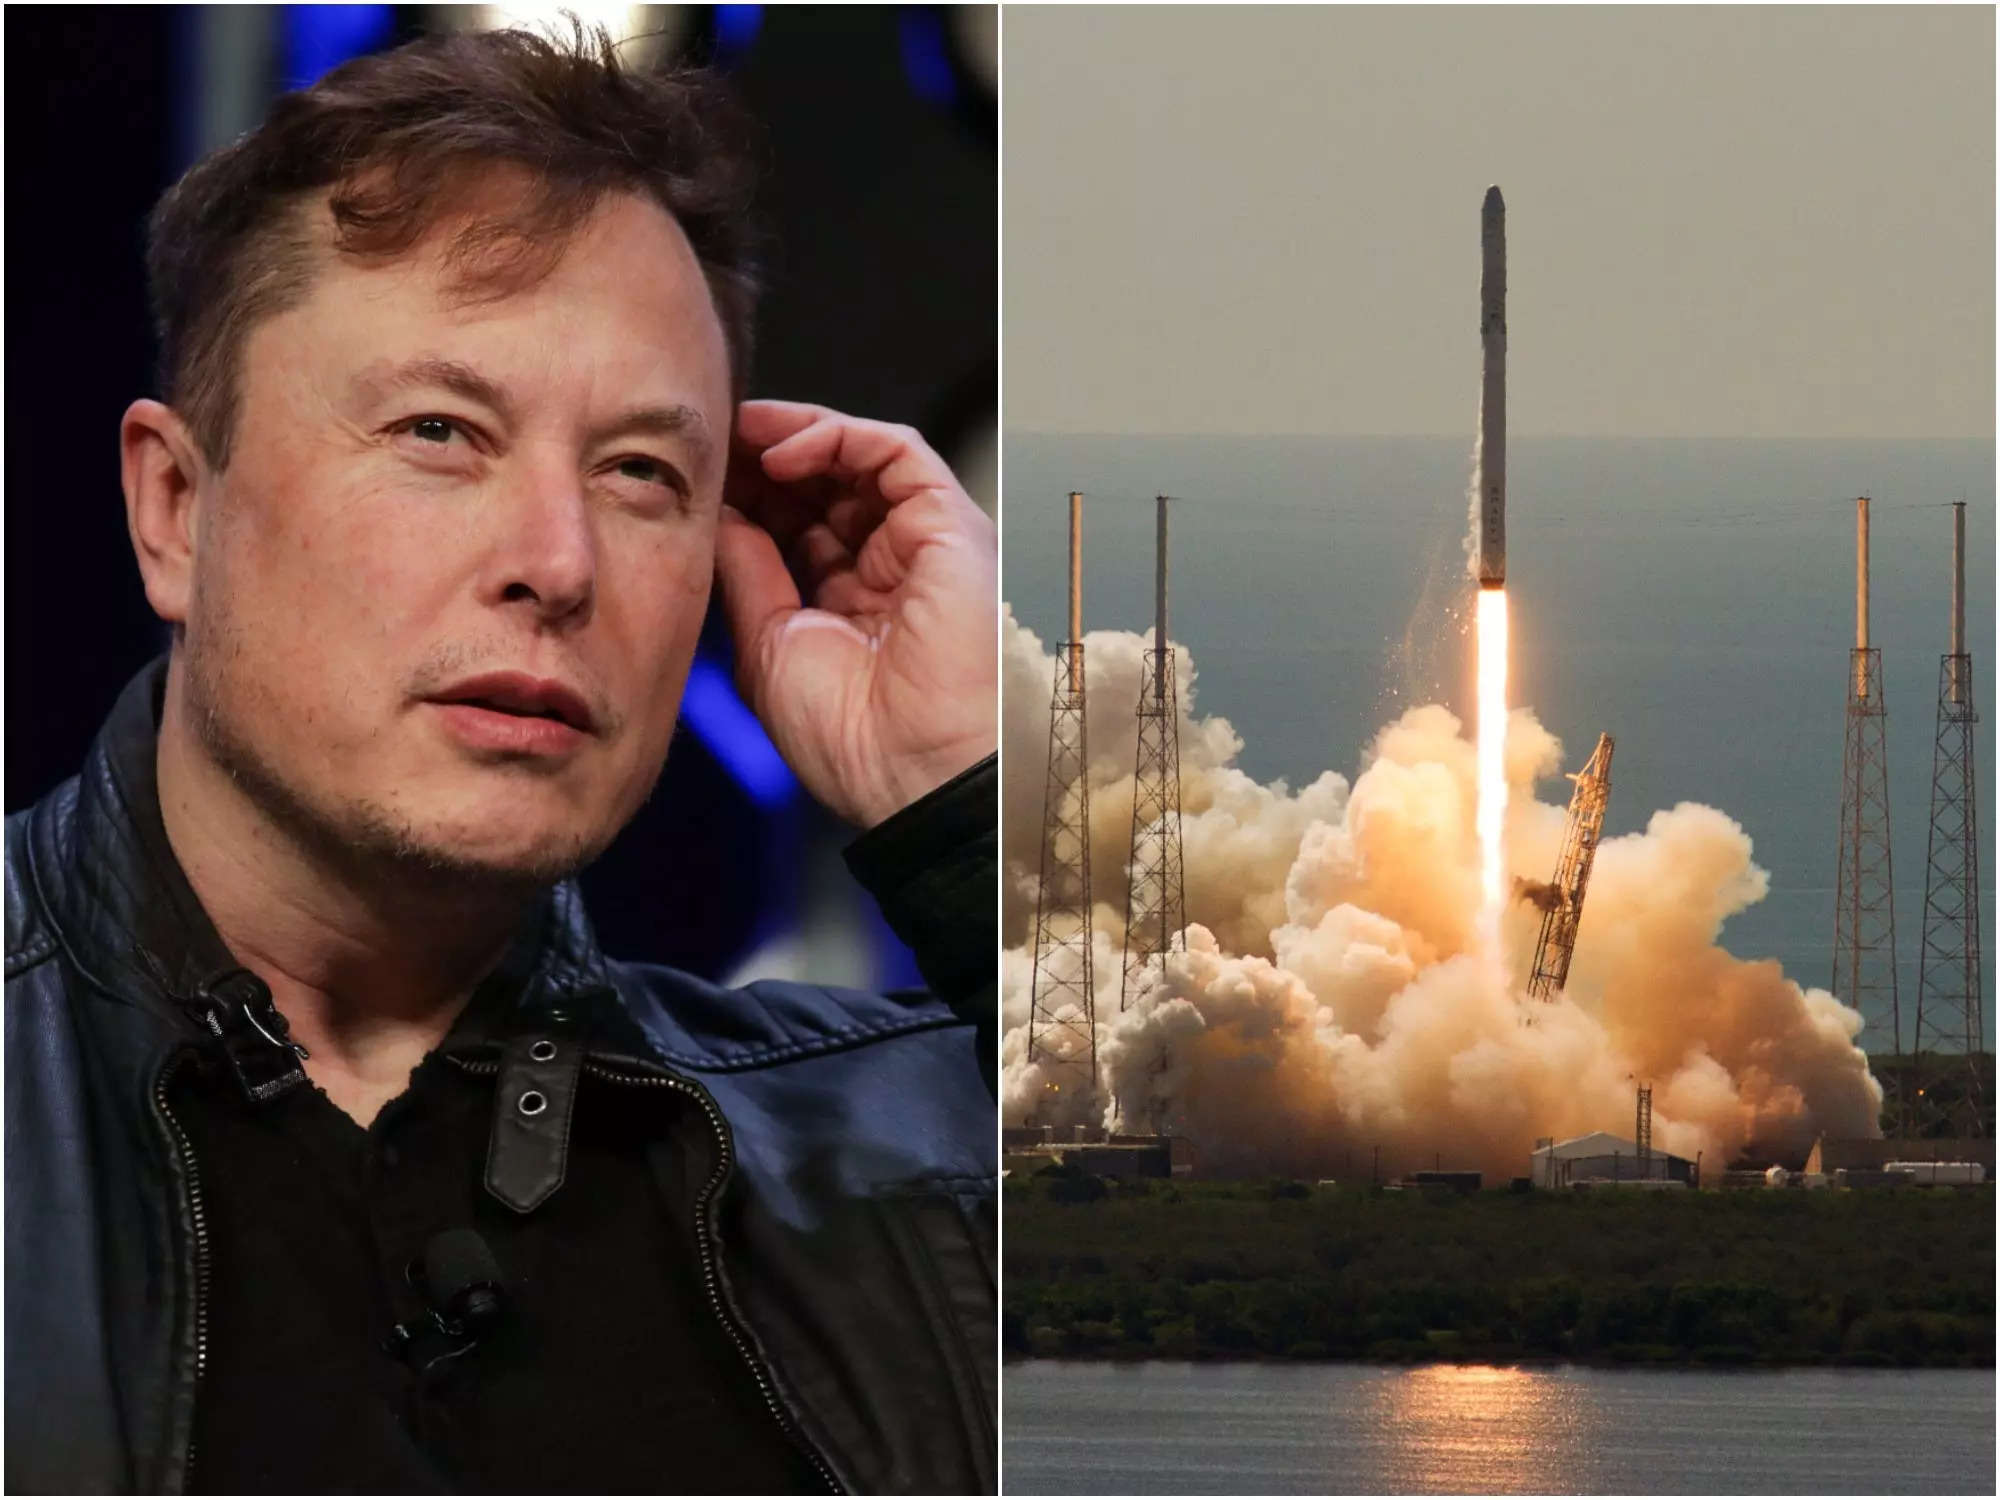 SpaceX is selling shares at $ 125 billion valuation as Elon Musk rejigs Twitter financing, reports say